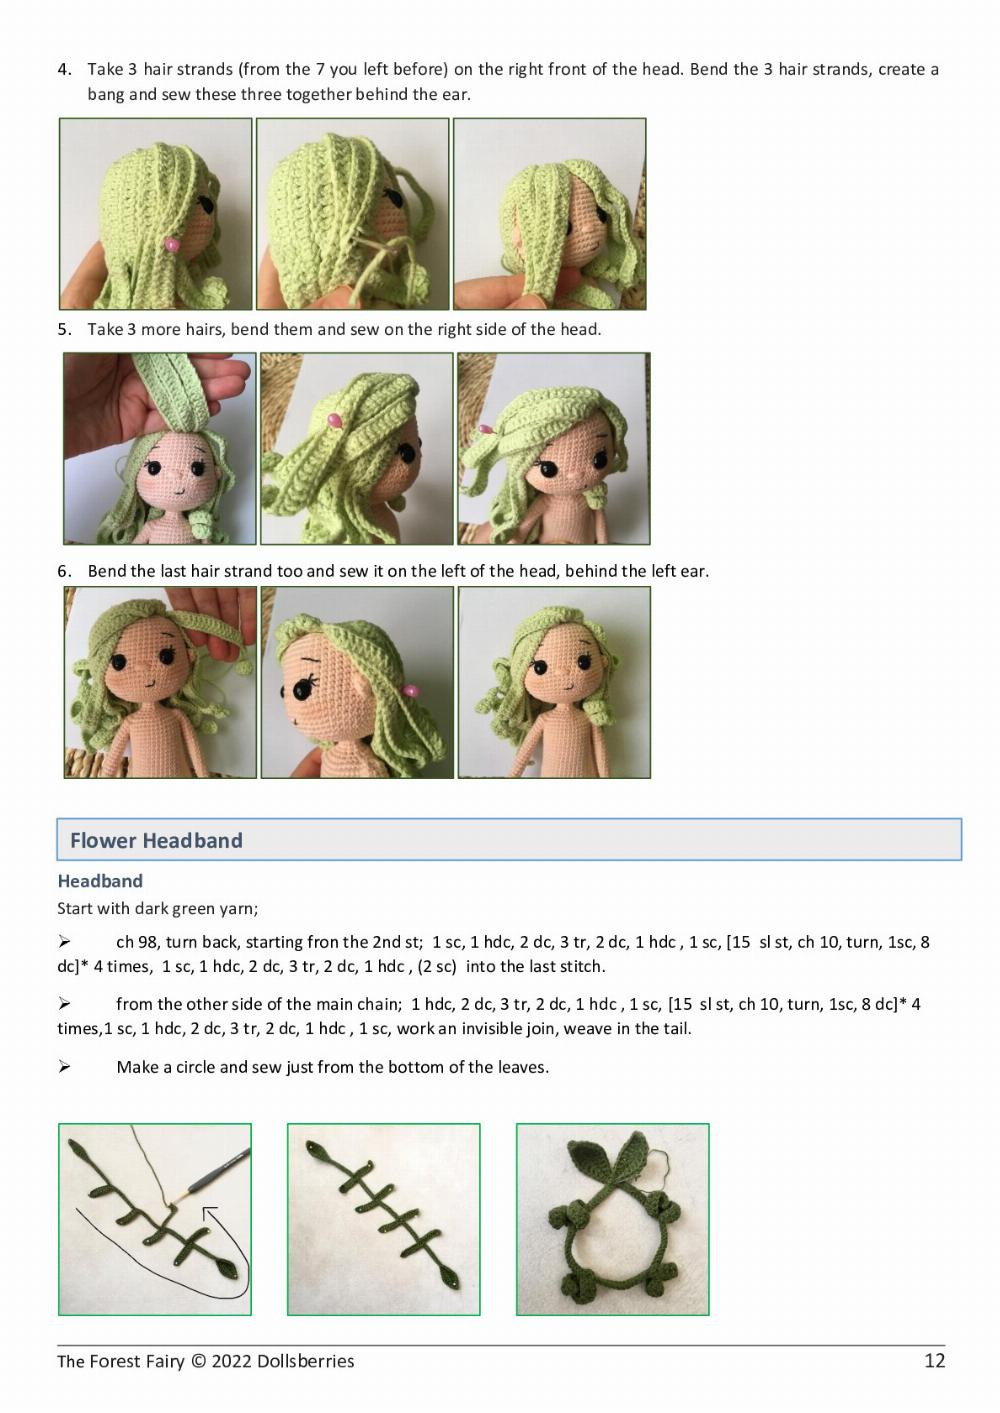 The Forest Fairy crochet pattern